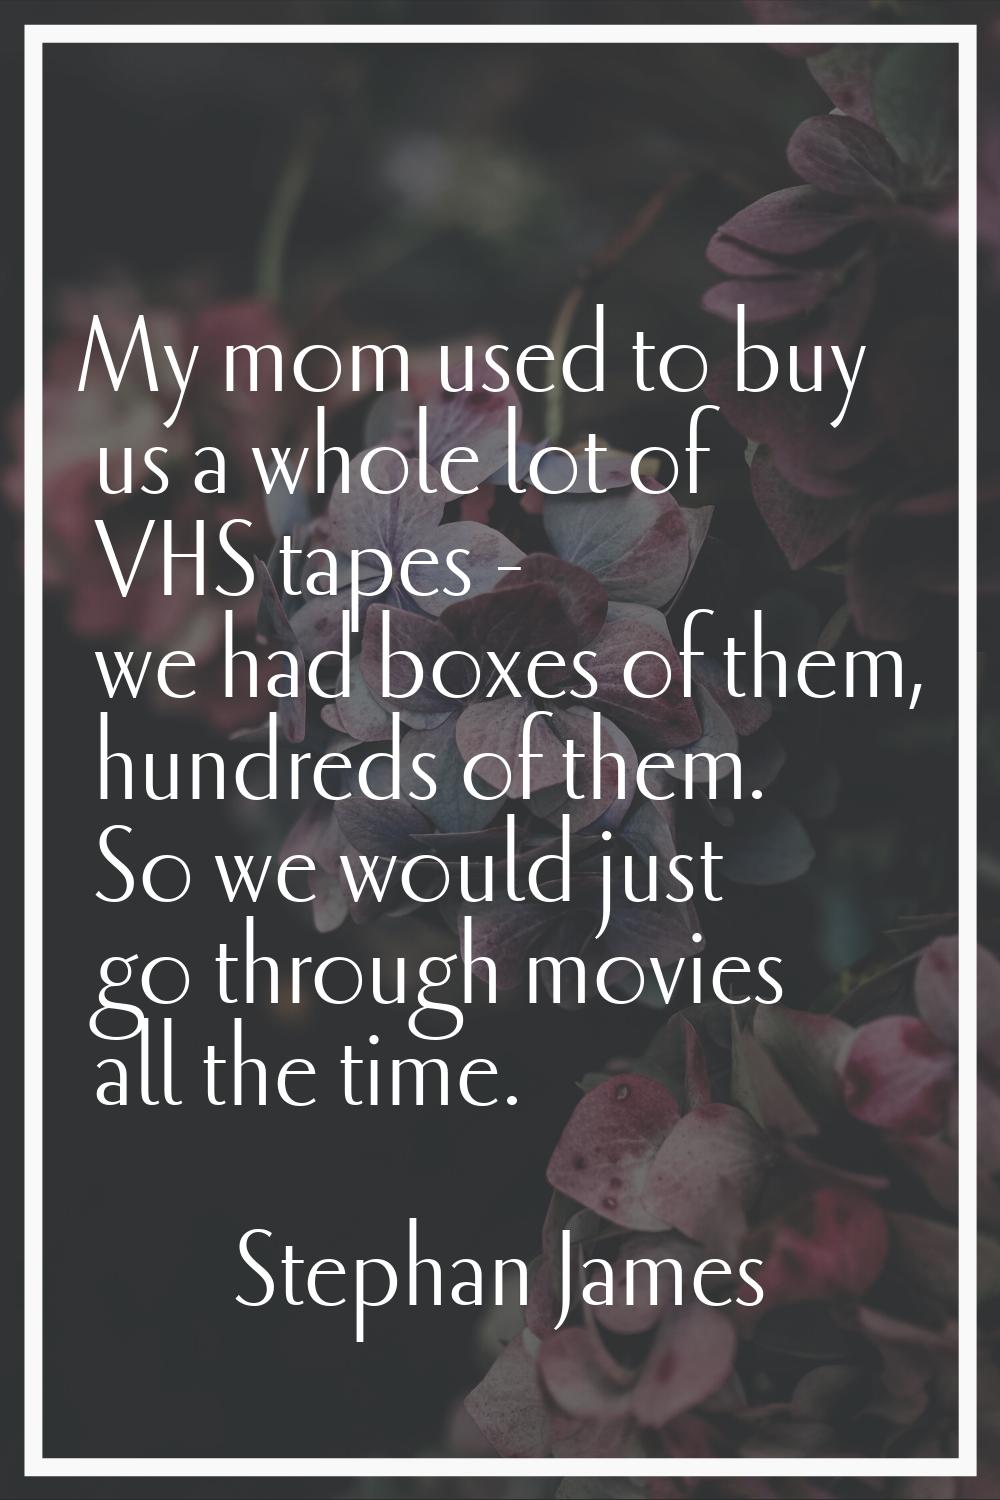 My mom used to buy us a whole lot of VHS tapes - we had boxes of them, hundreds of them. So we woul